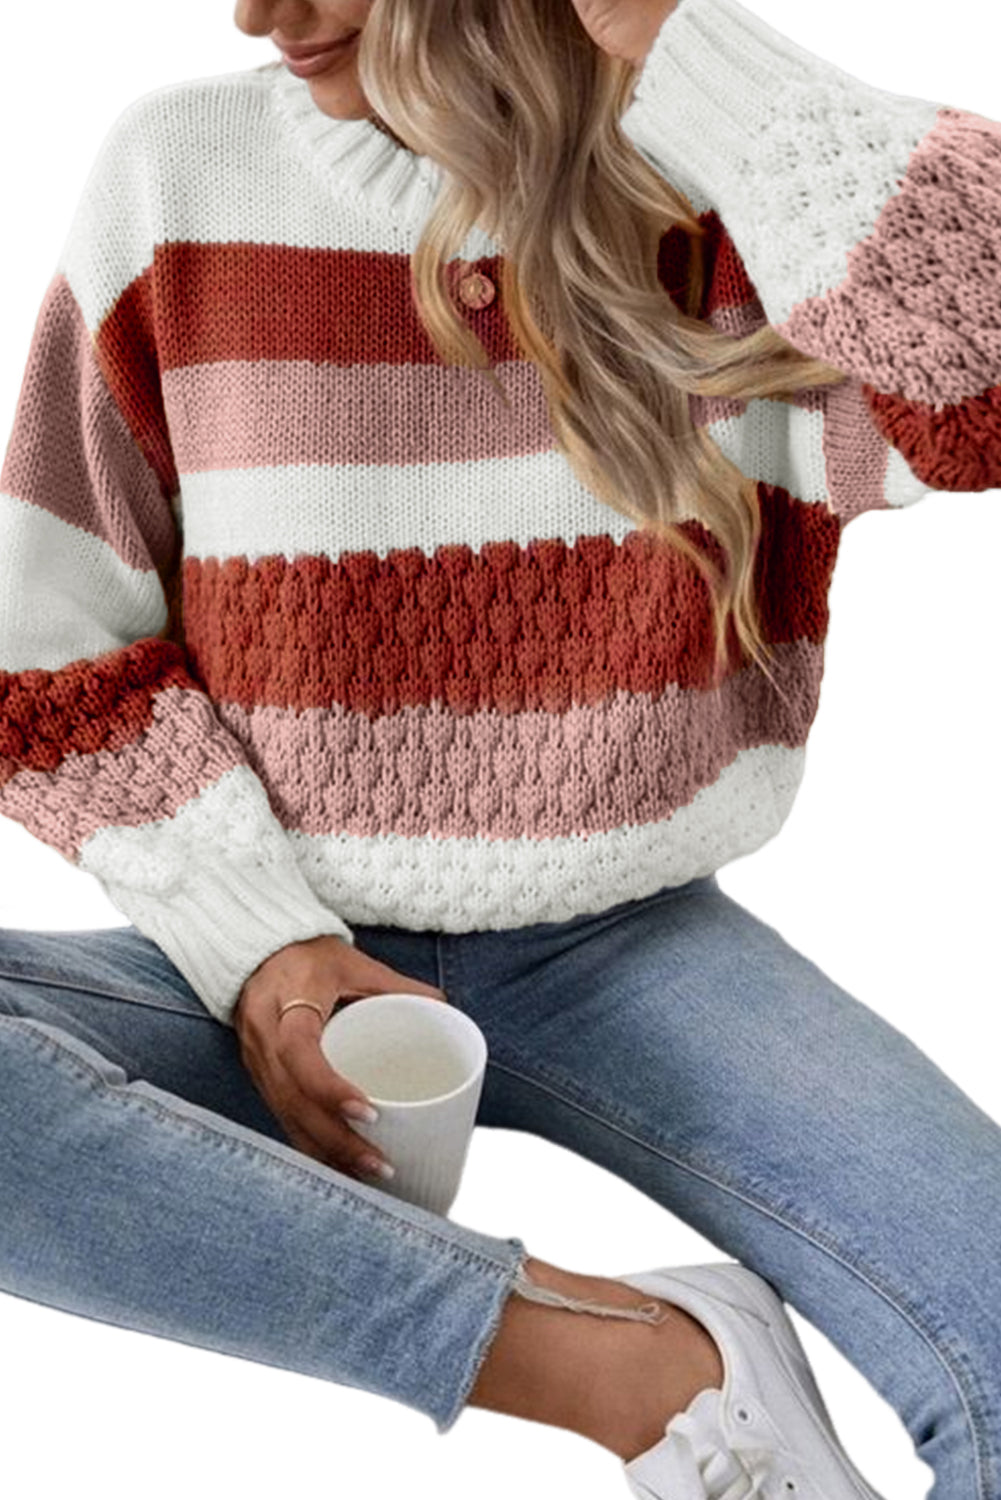 Red Stripe Cable Knit Women's Sweater